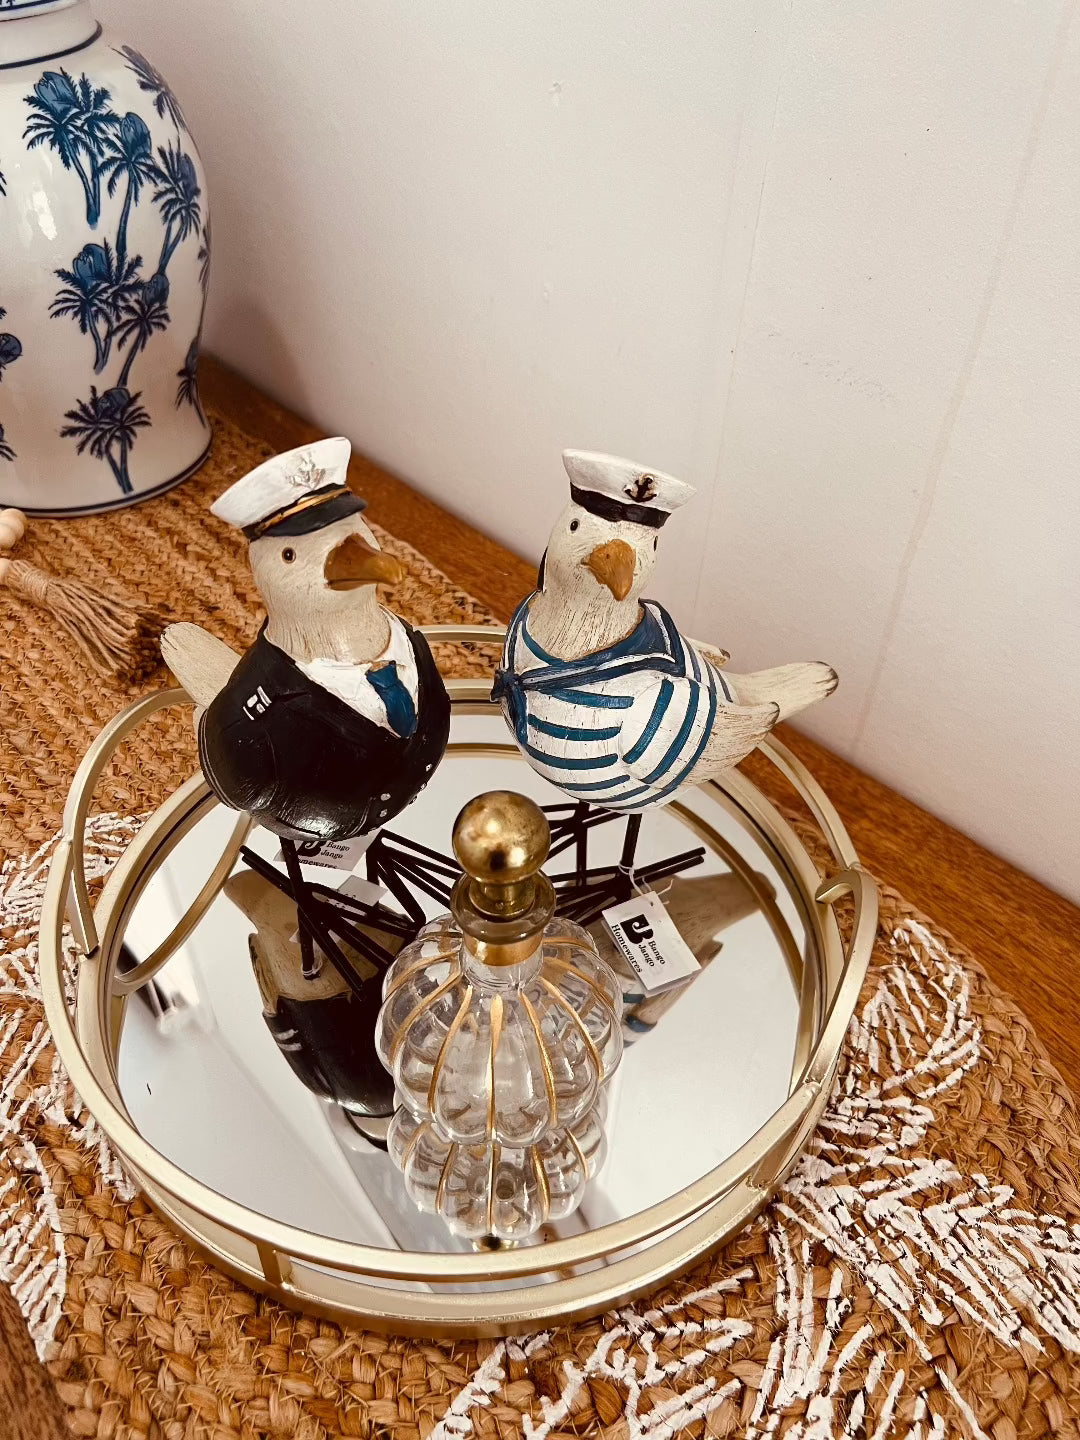 2 x Navy and White Sailing Birds